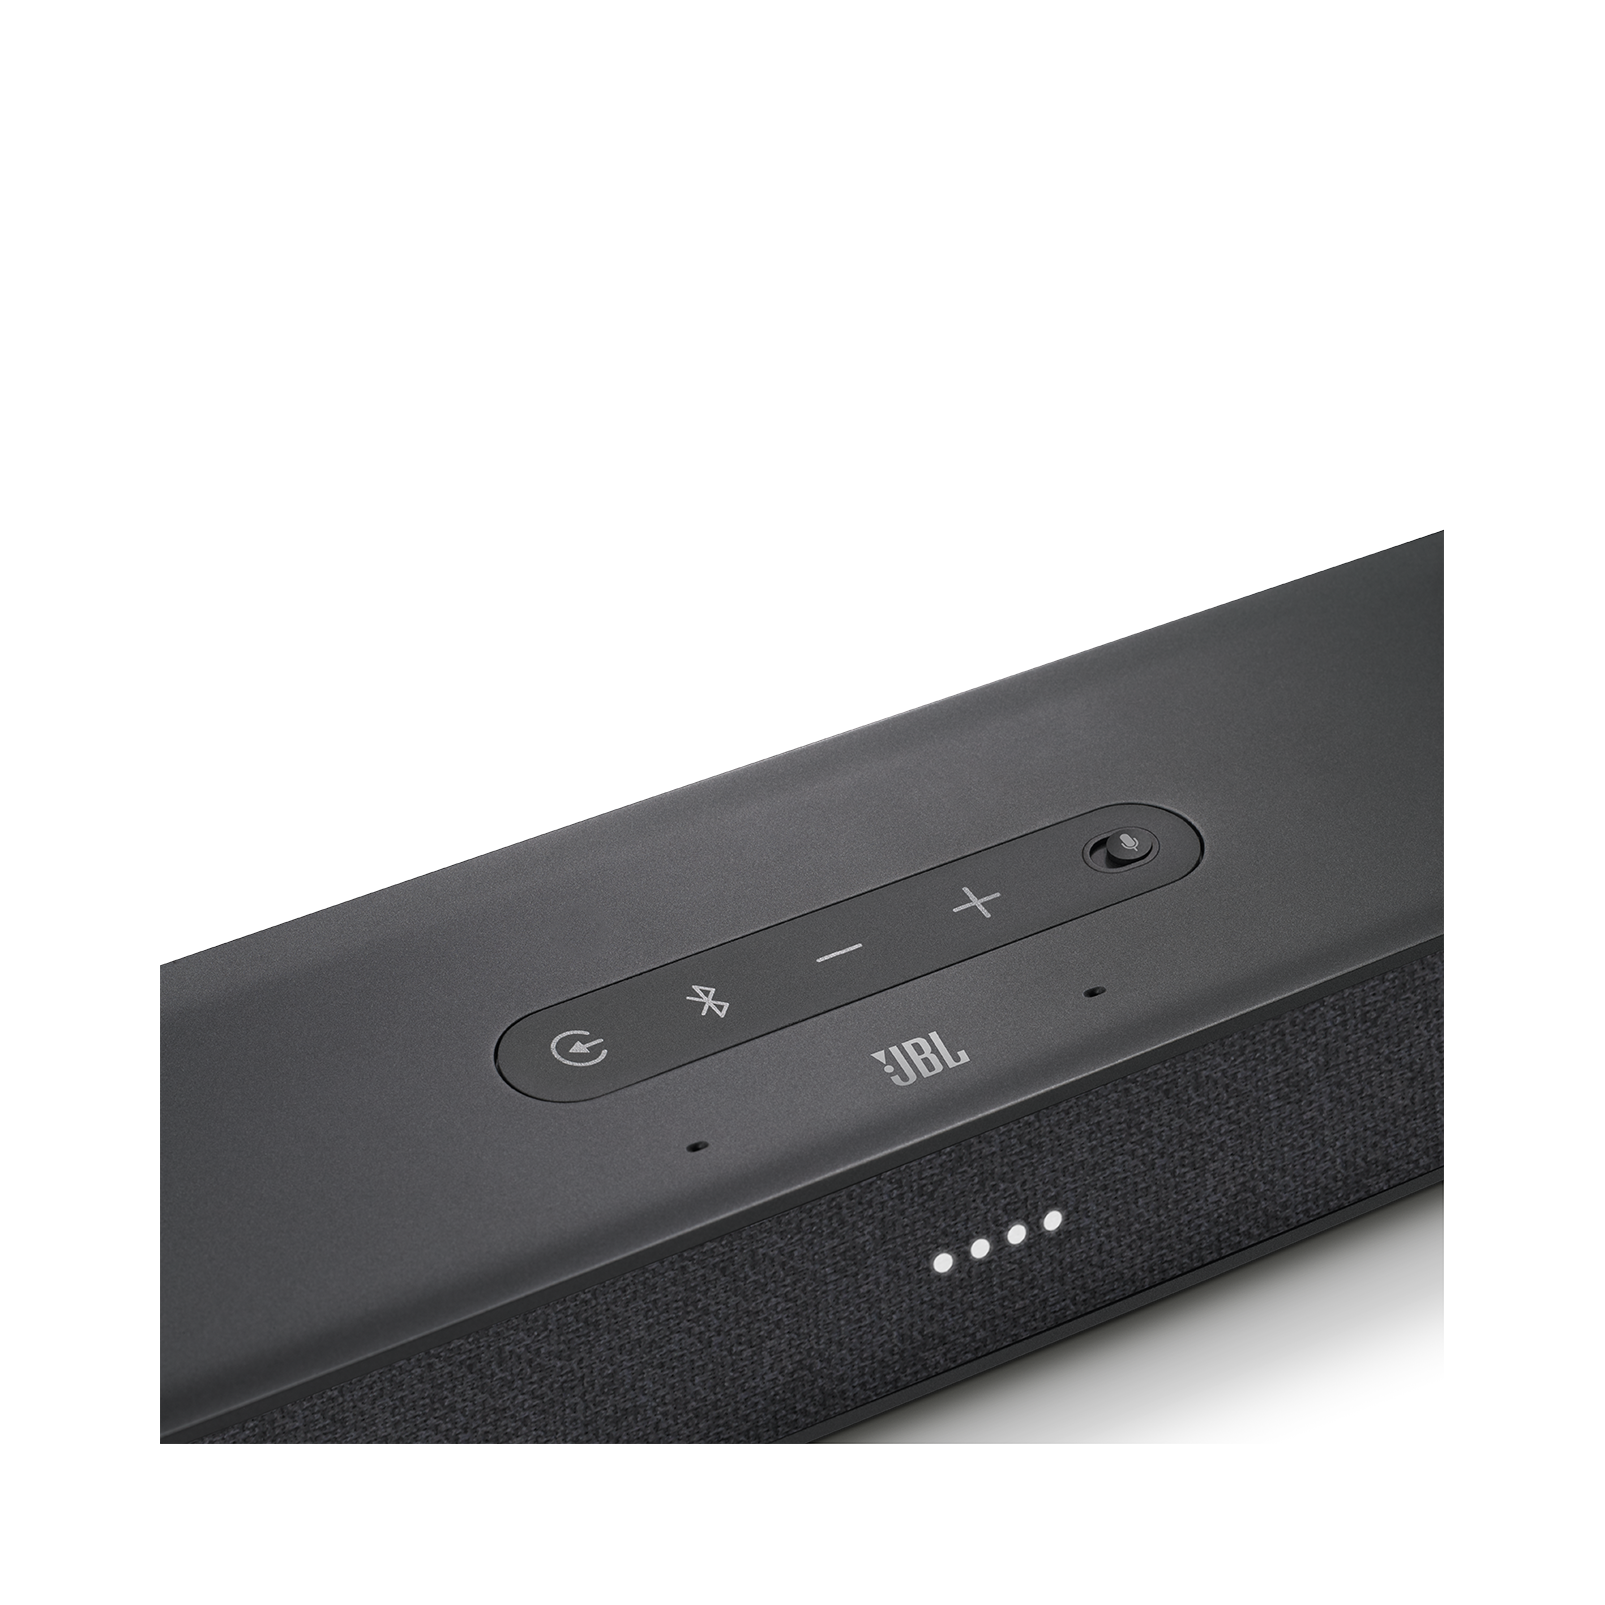 JBL Link Bar - Grey - Voice-Activated Soundbar with Android TV and the Google Assistant built-in - Detailshot 2